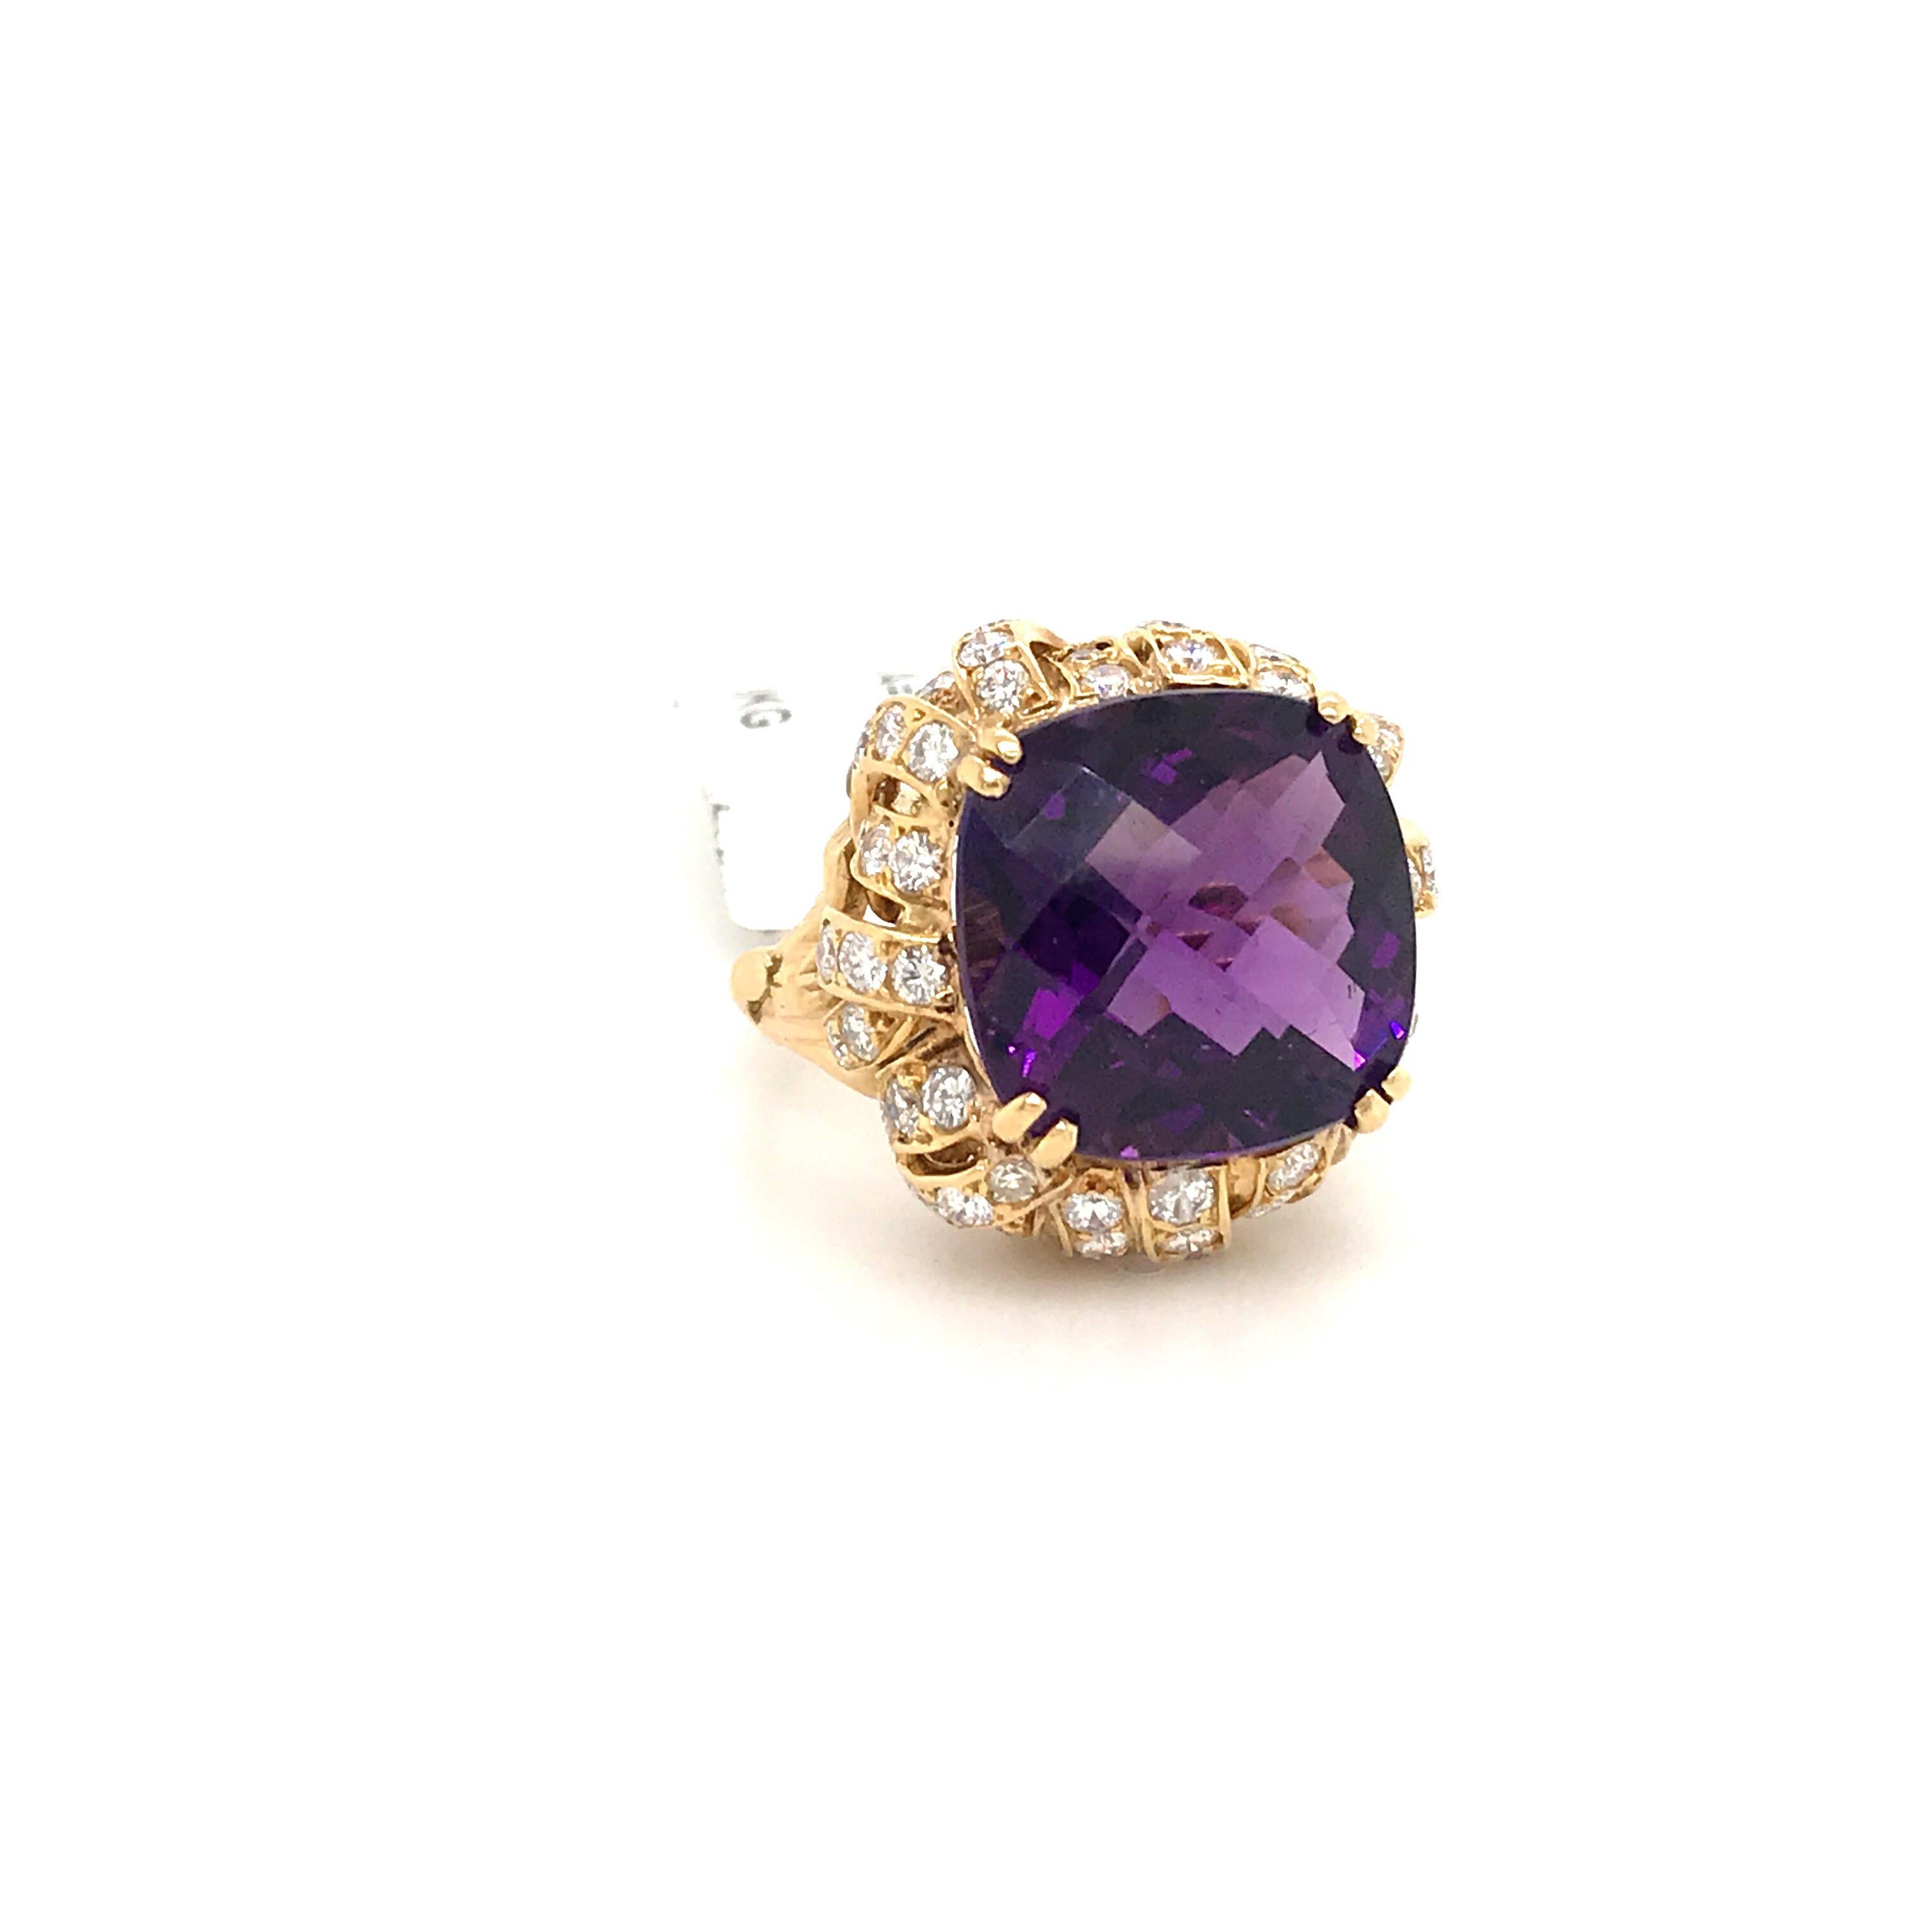 18K Yellow gold ring featuring one cushion cut Amethyst weighing 20 carats flanked with diamond petal motif weighing 3 carats.

Color G
Clartiy VS-SI

Ring is sizeable. 

Amethyst: 14.91 mm x 15.19 mm